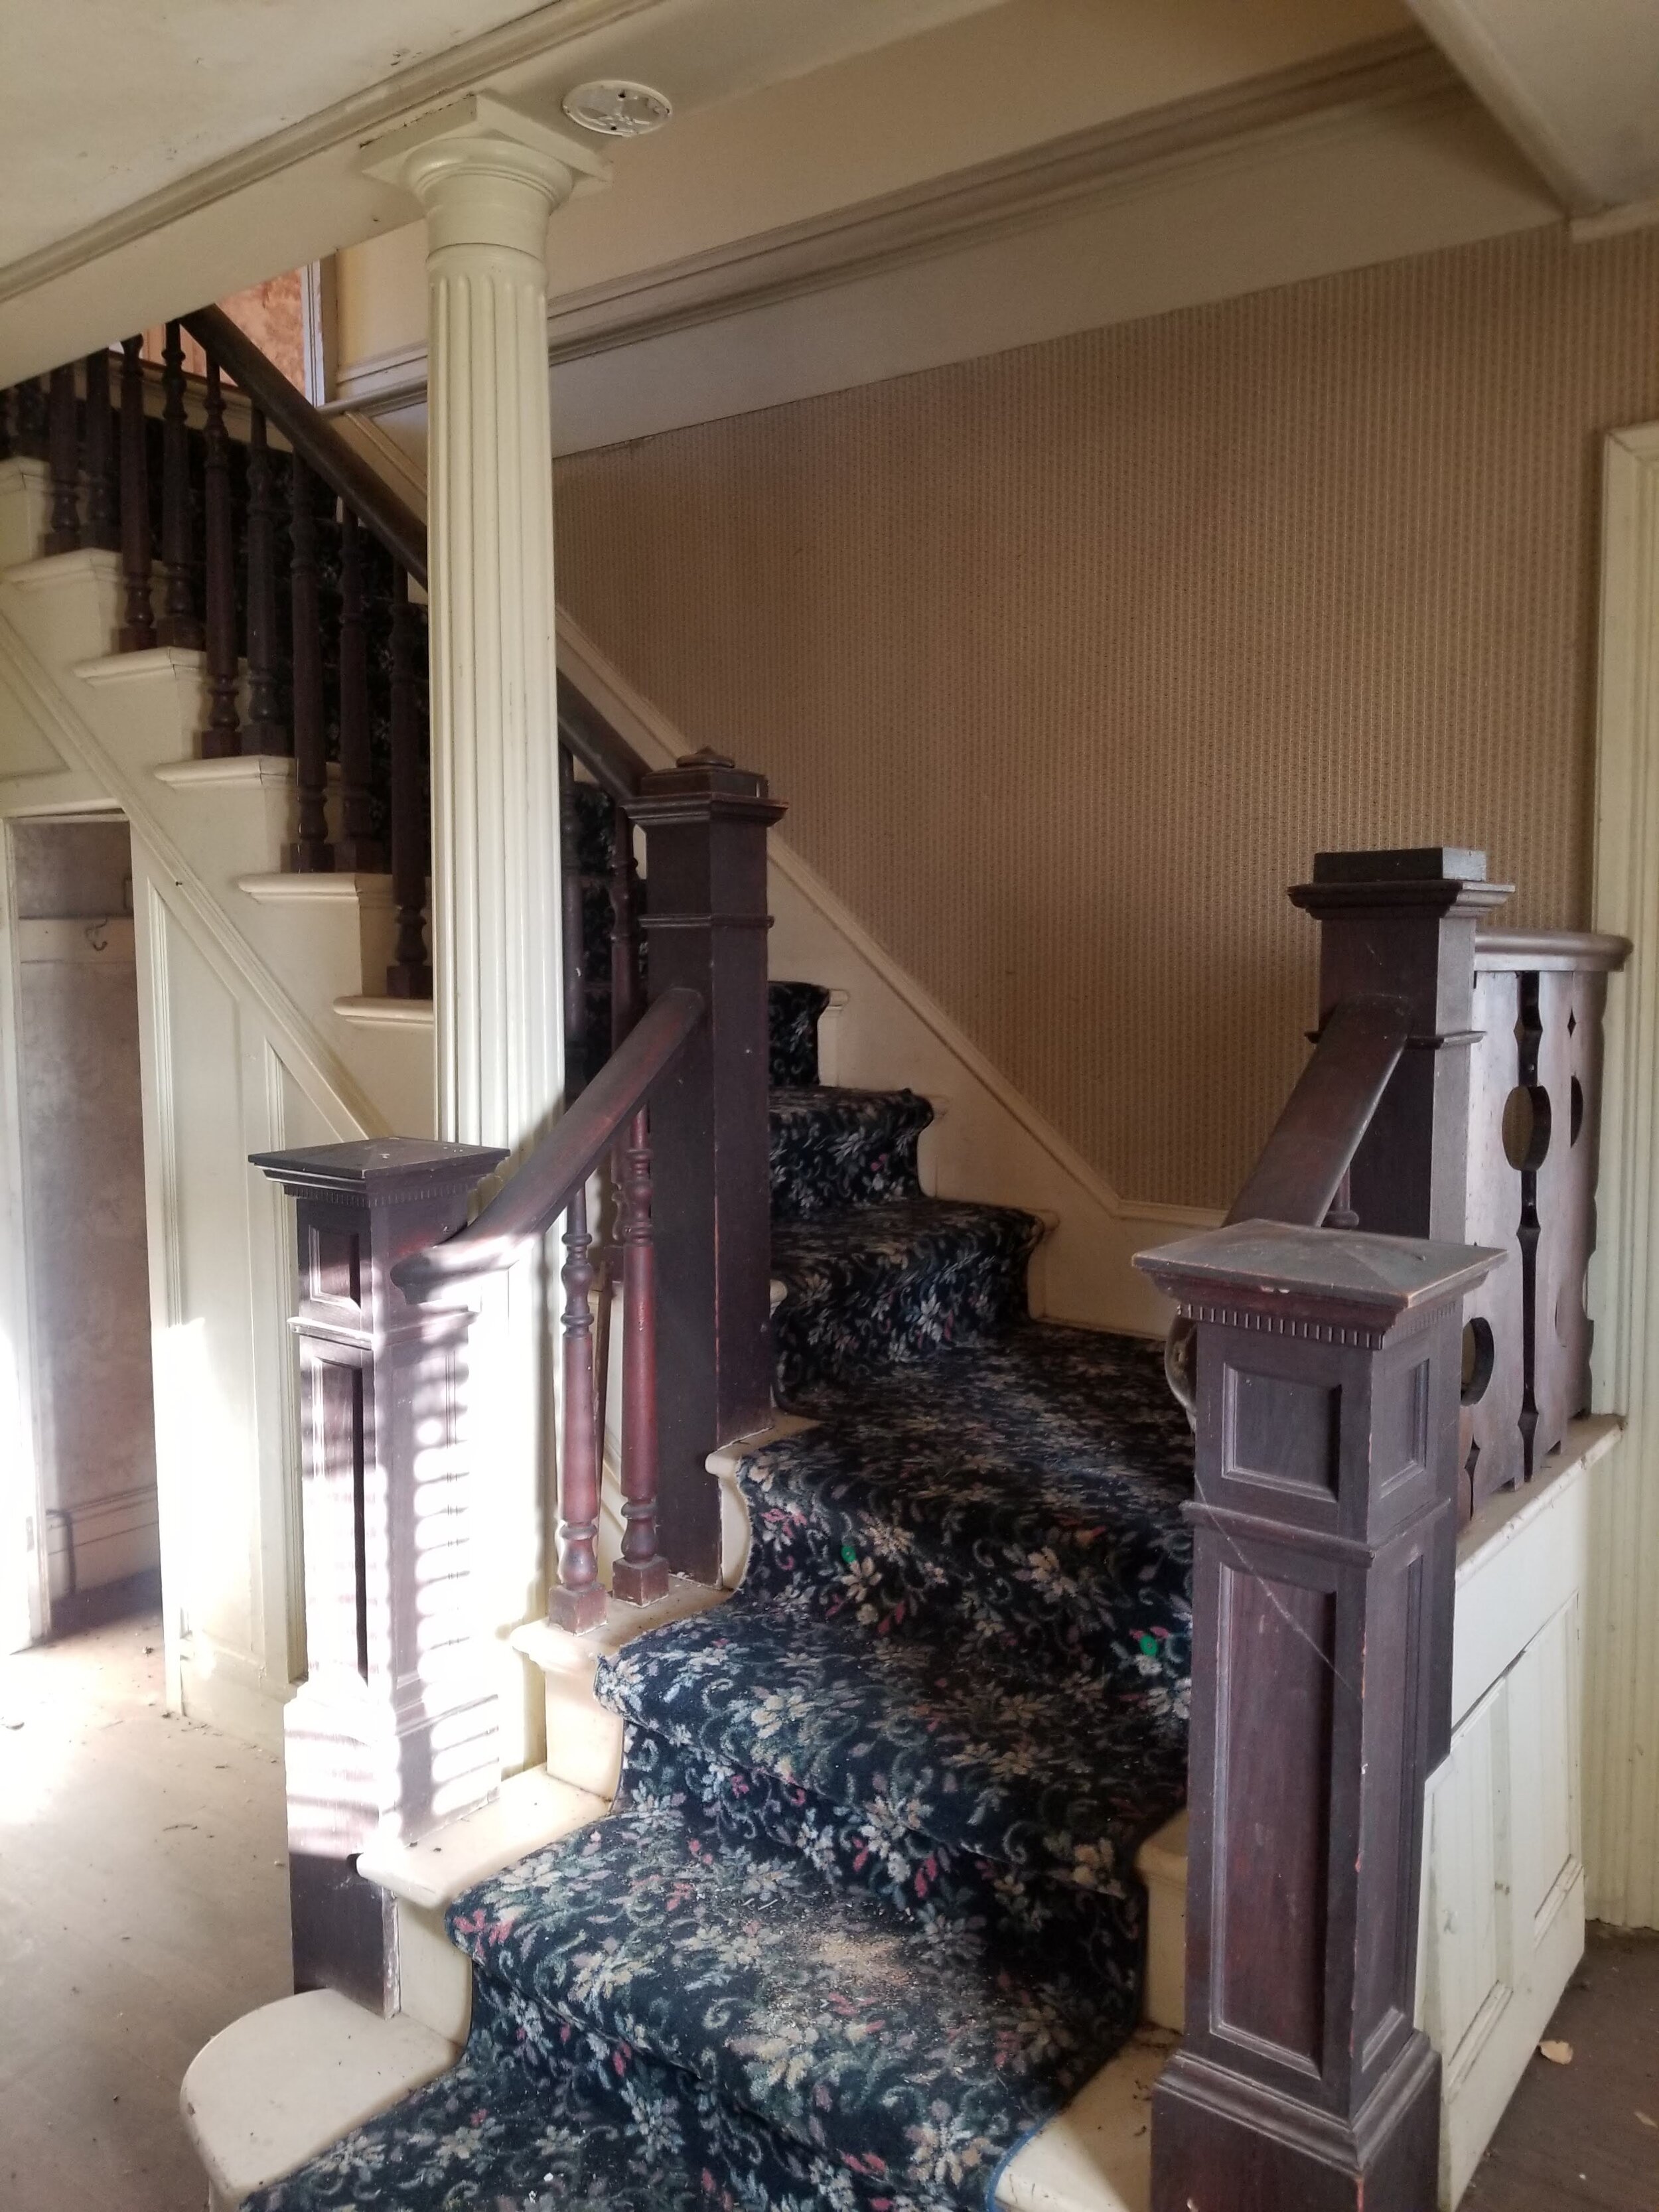 Ornate Staircase